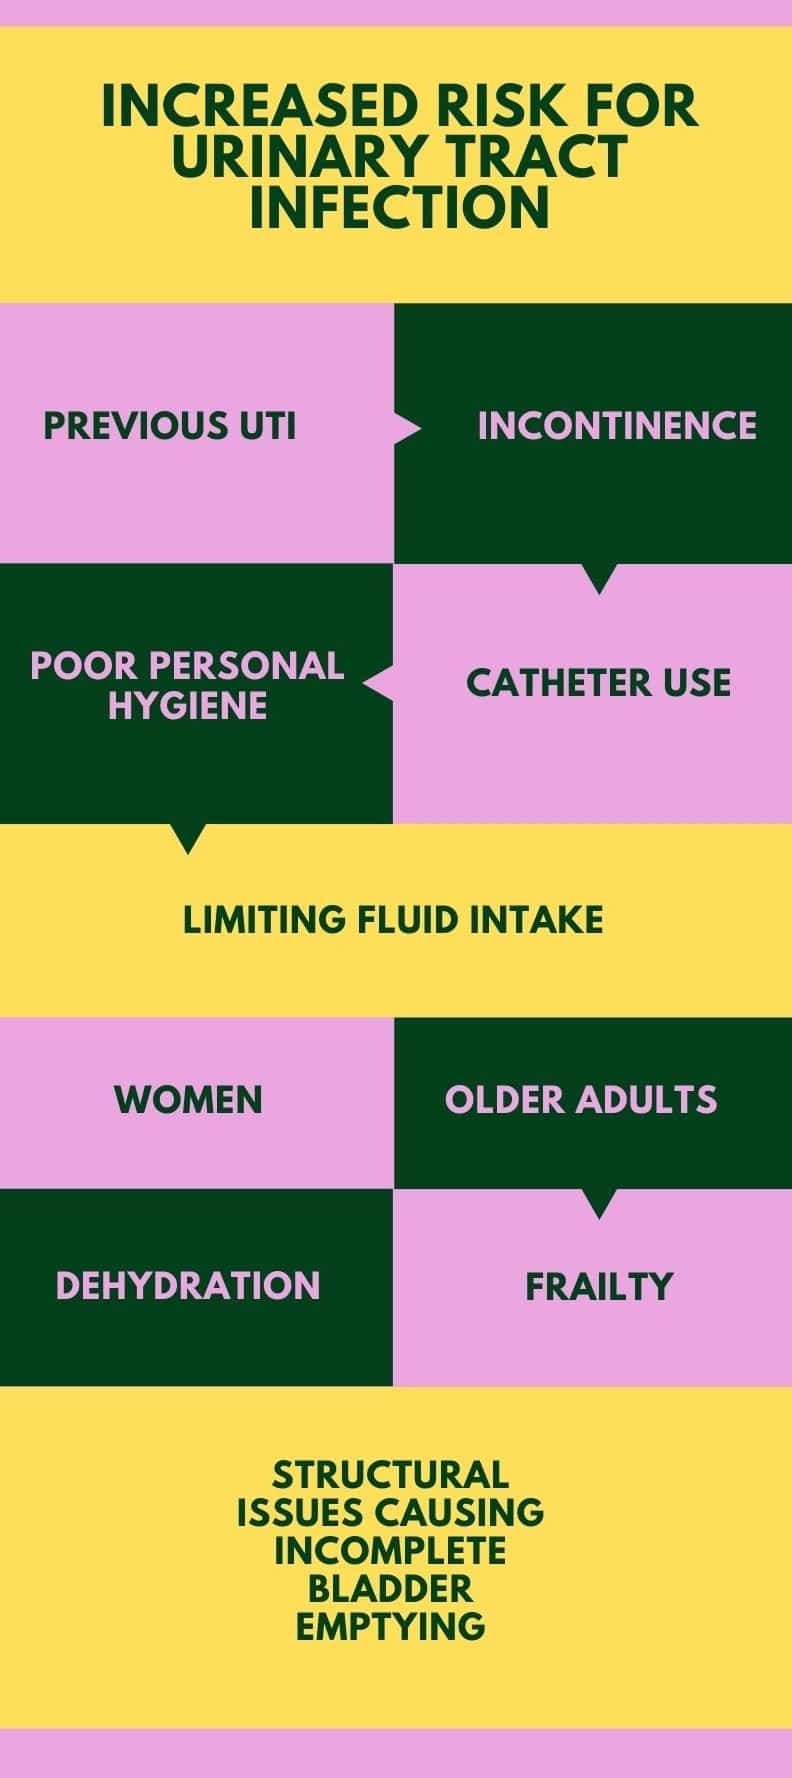 List of urinary tract infection risk factors